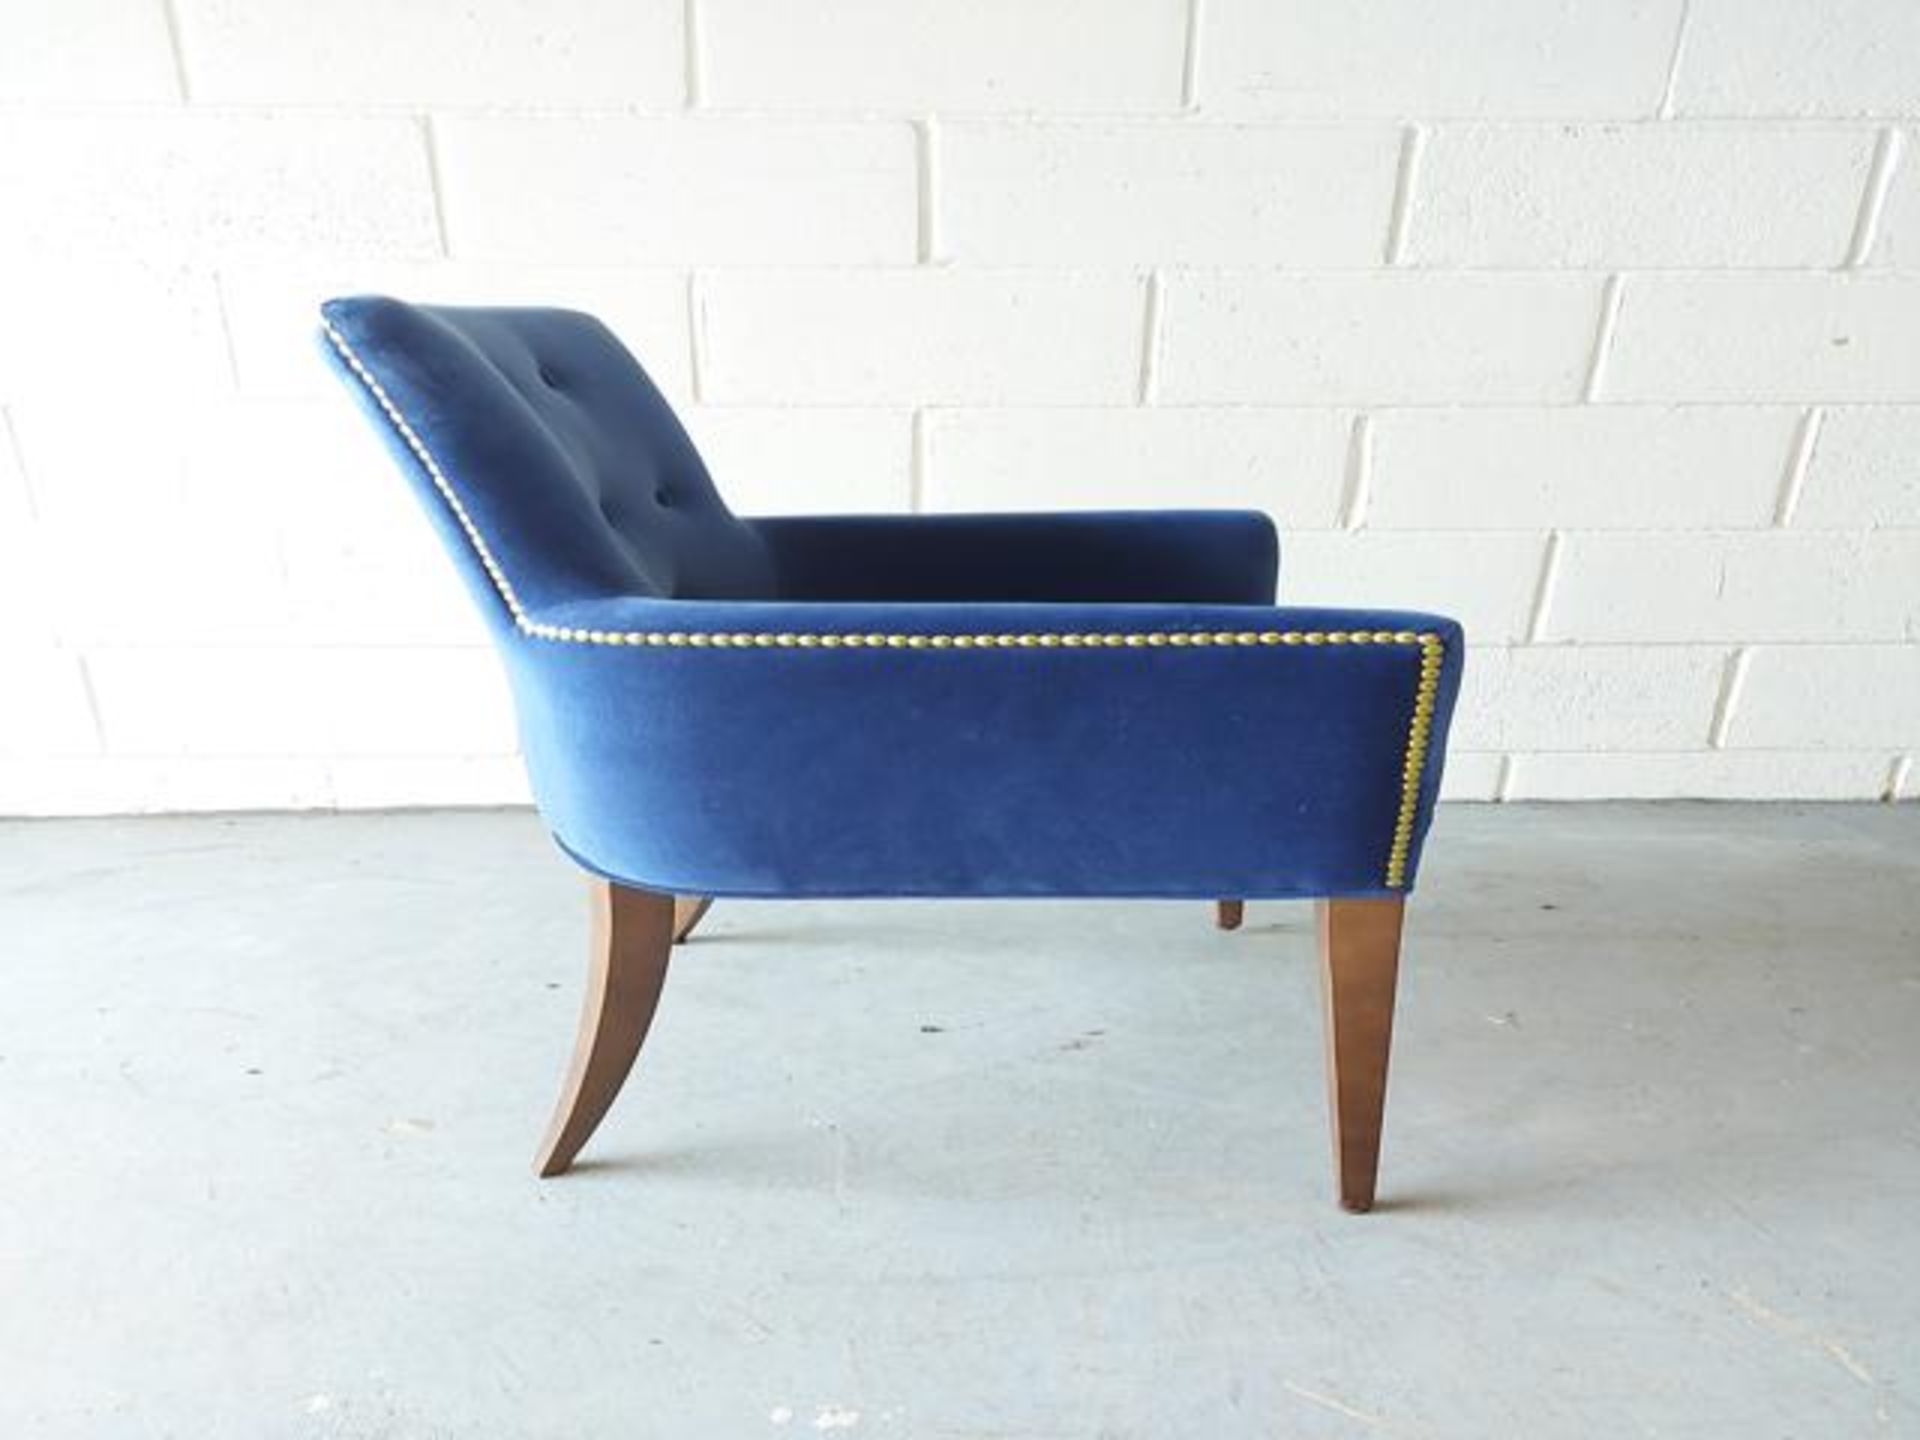 Blue bespoke bead trimmed dining chair - Image 3 of 4